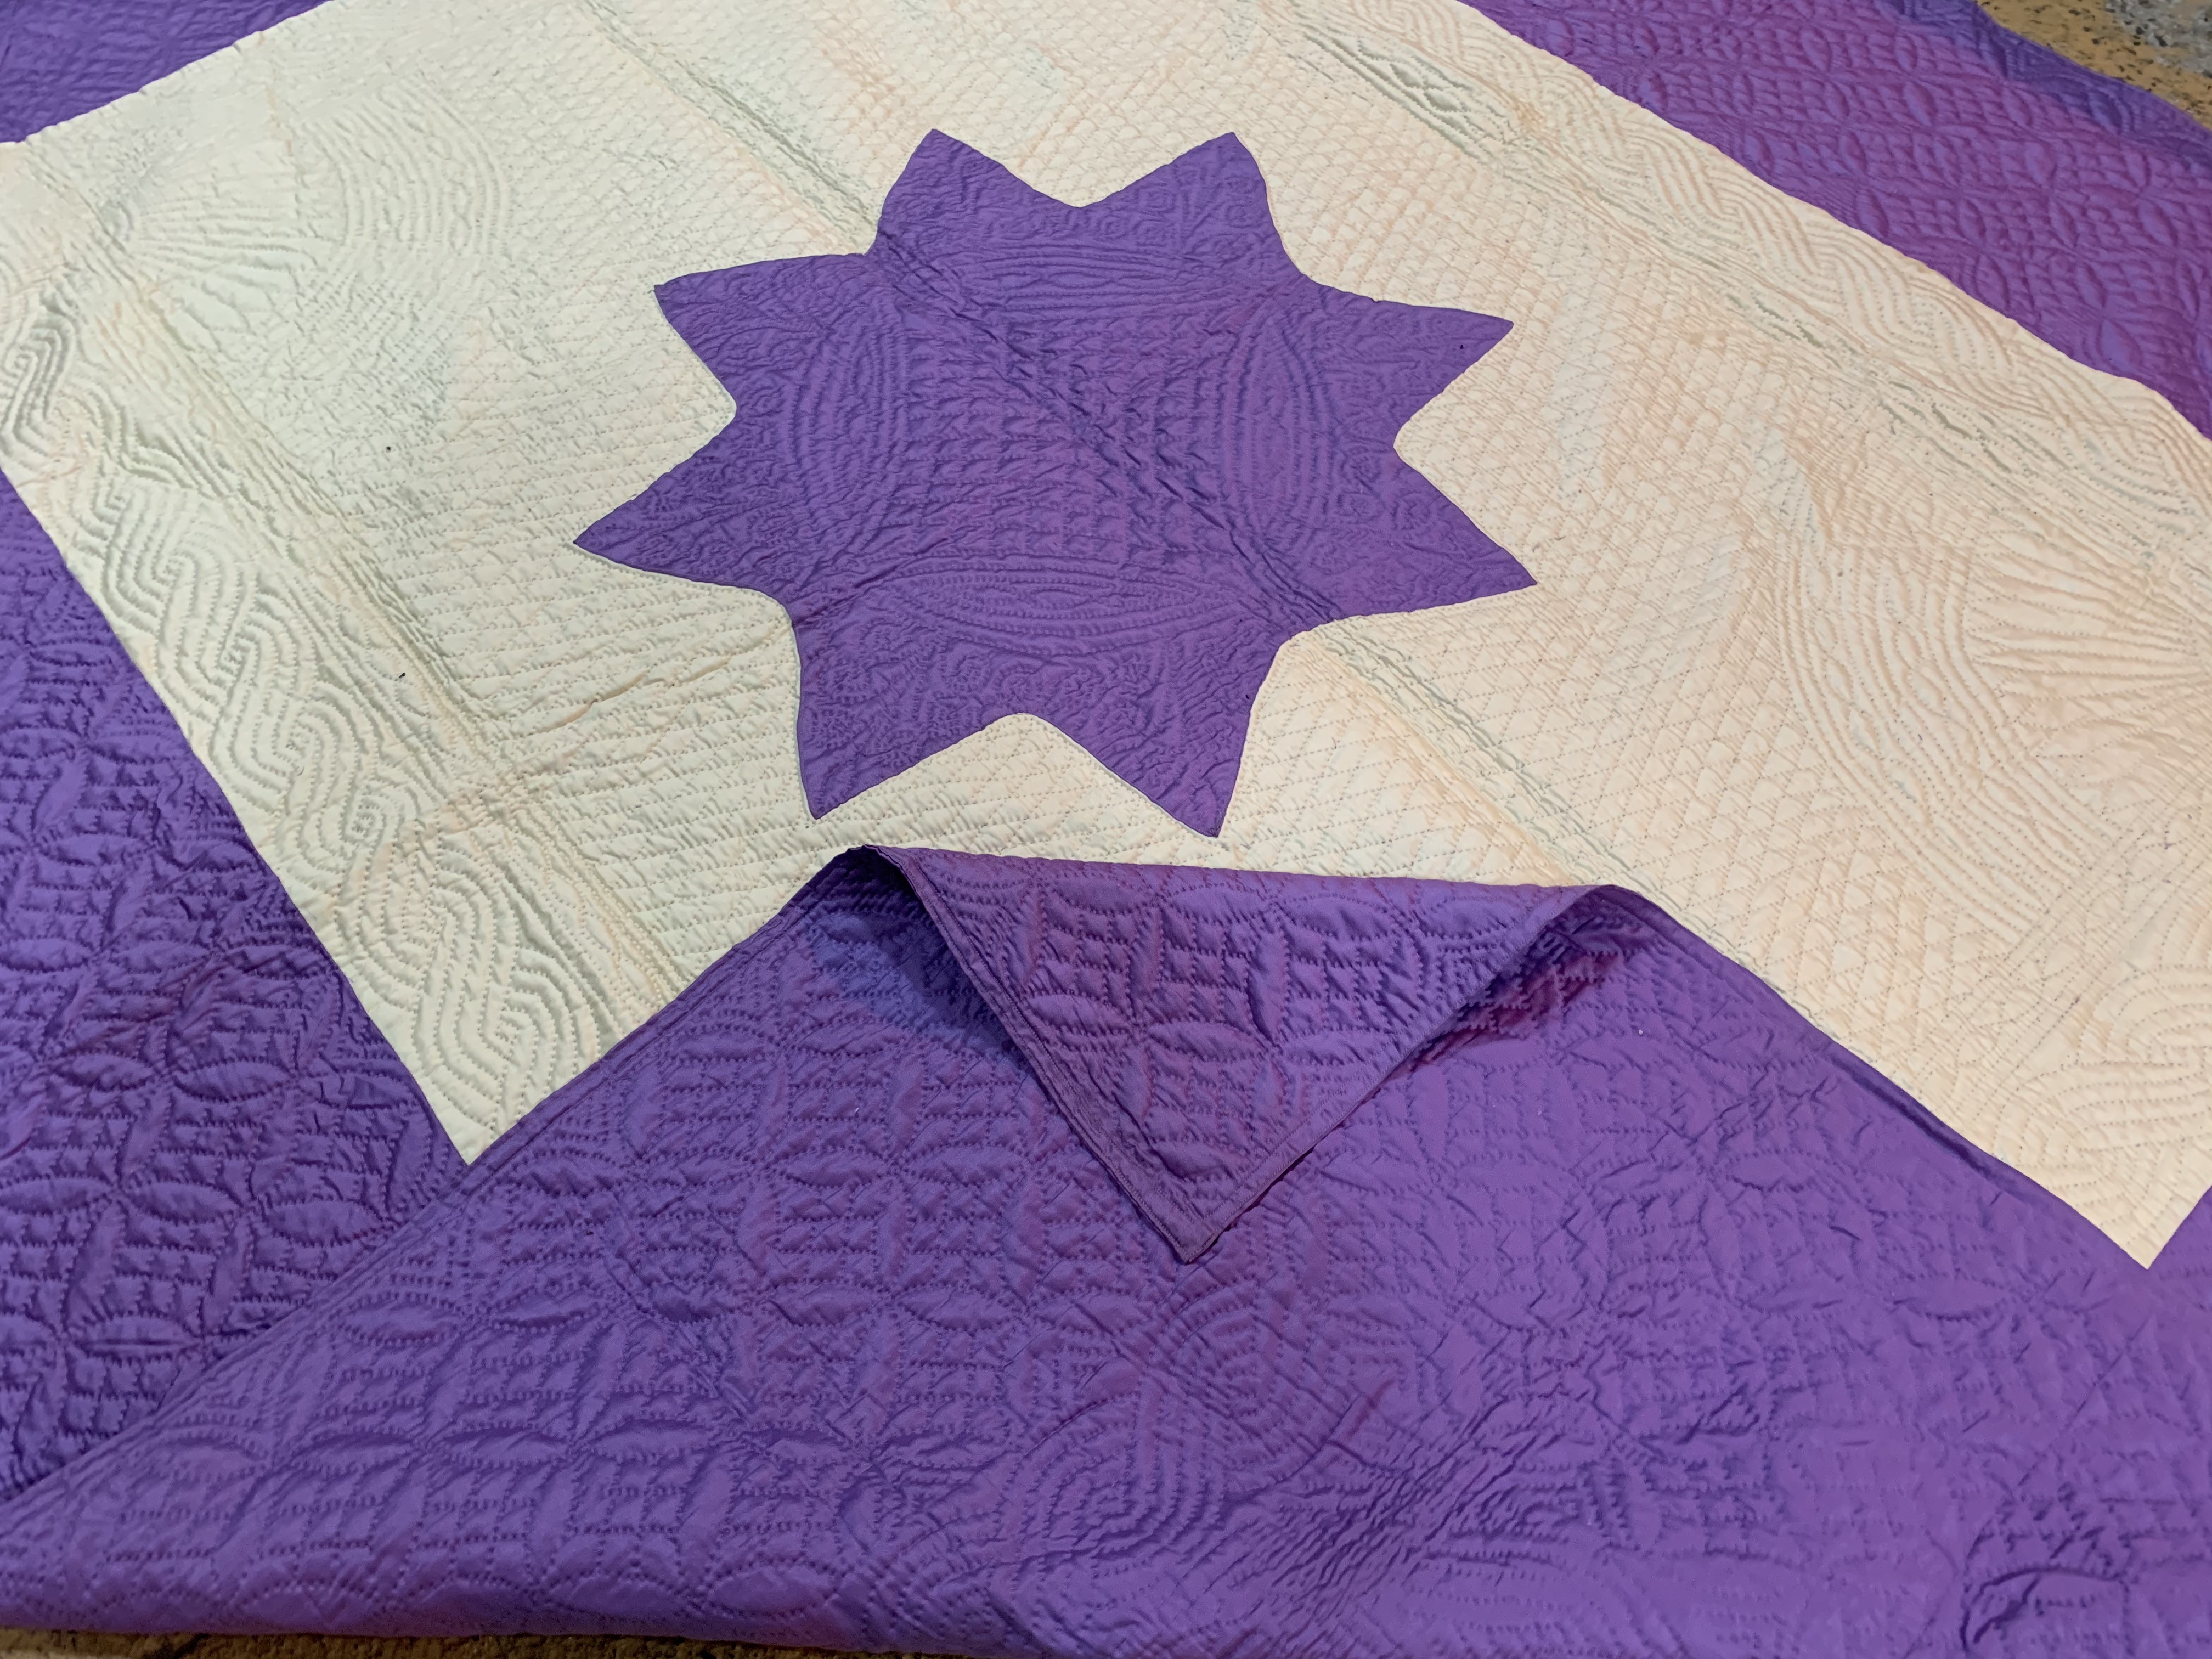 An antique Durham quilt of bright violet cotton, with a soft satin sheen, 250 x 200, late 19th /